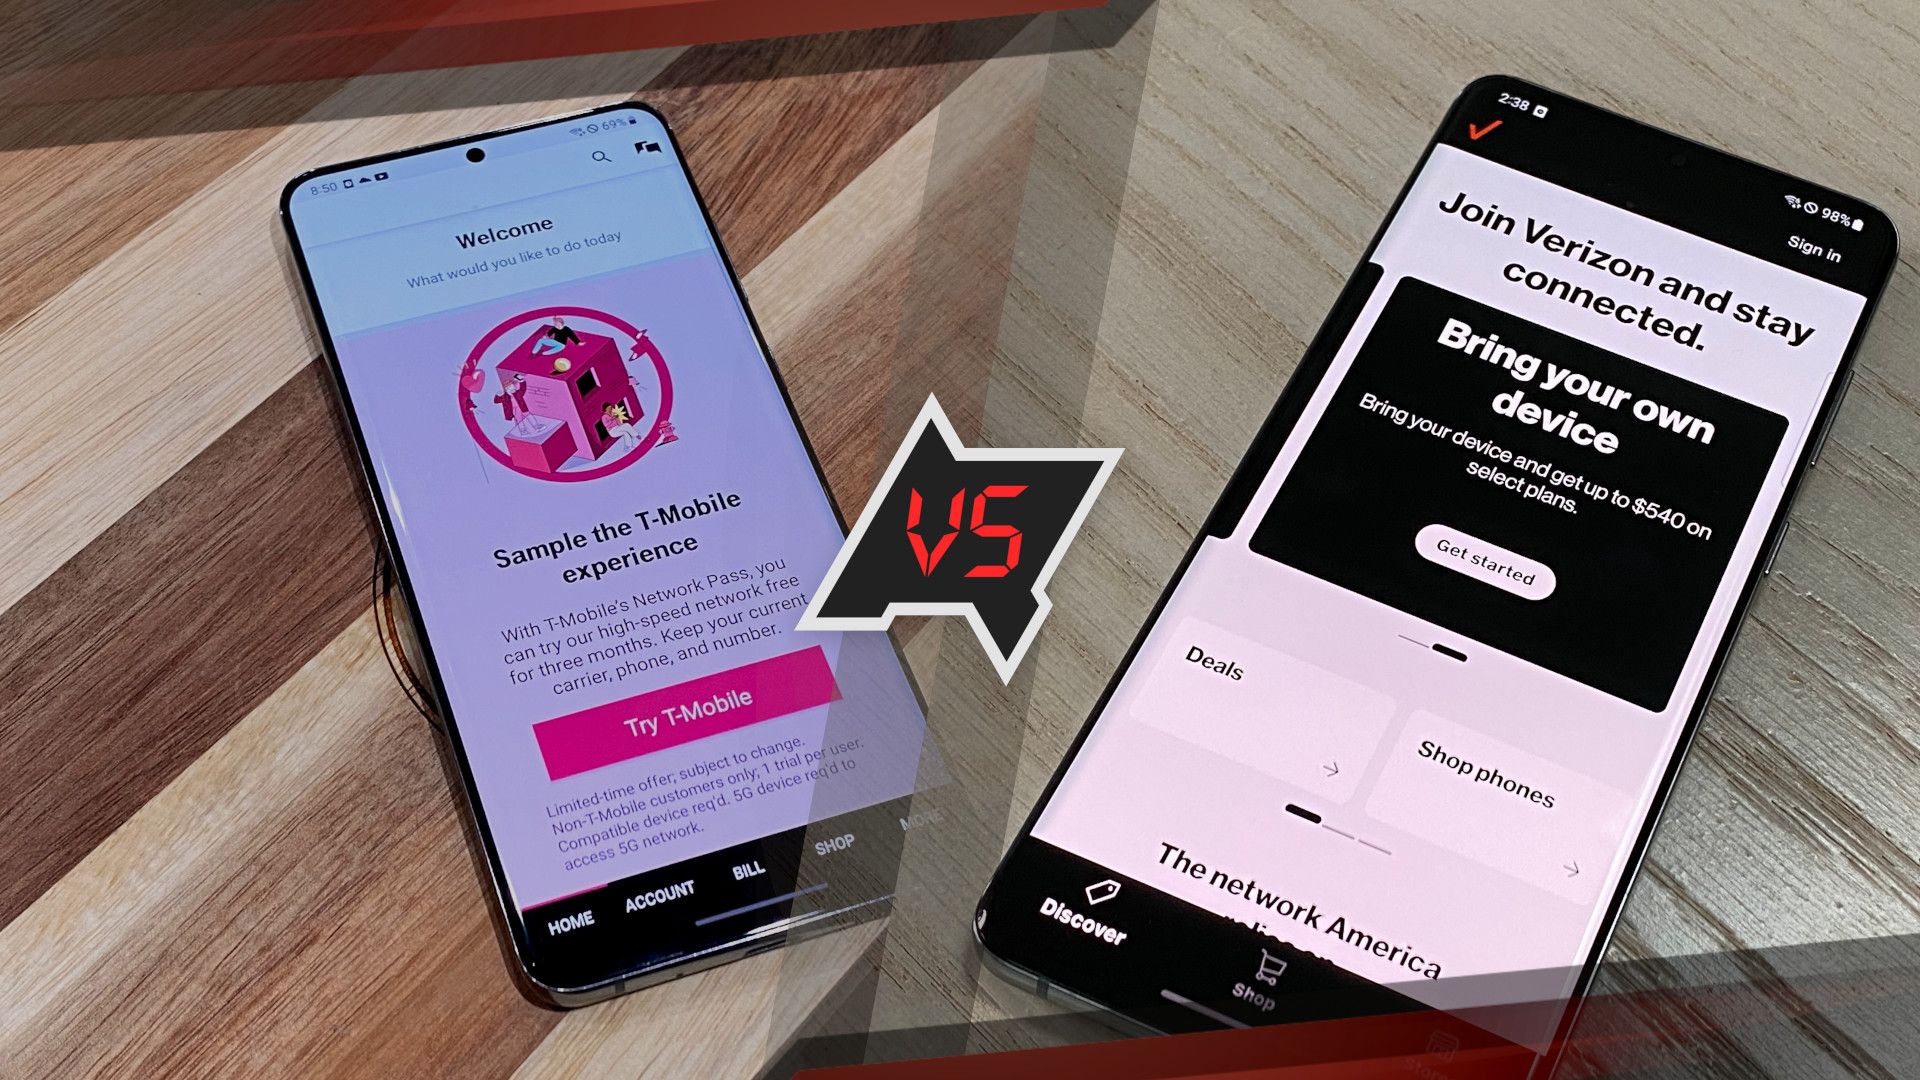 T-Mobile vs Verizon free trial on Android apps